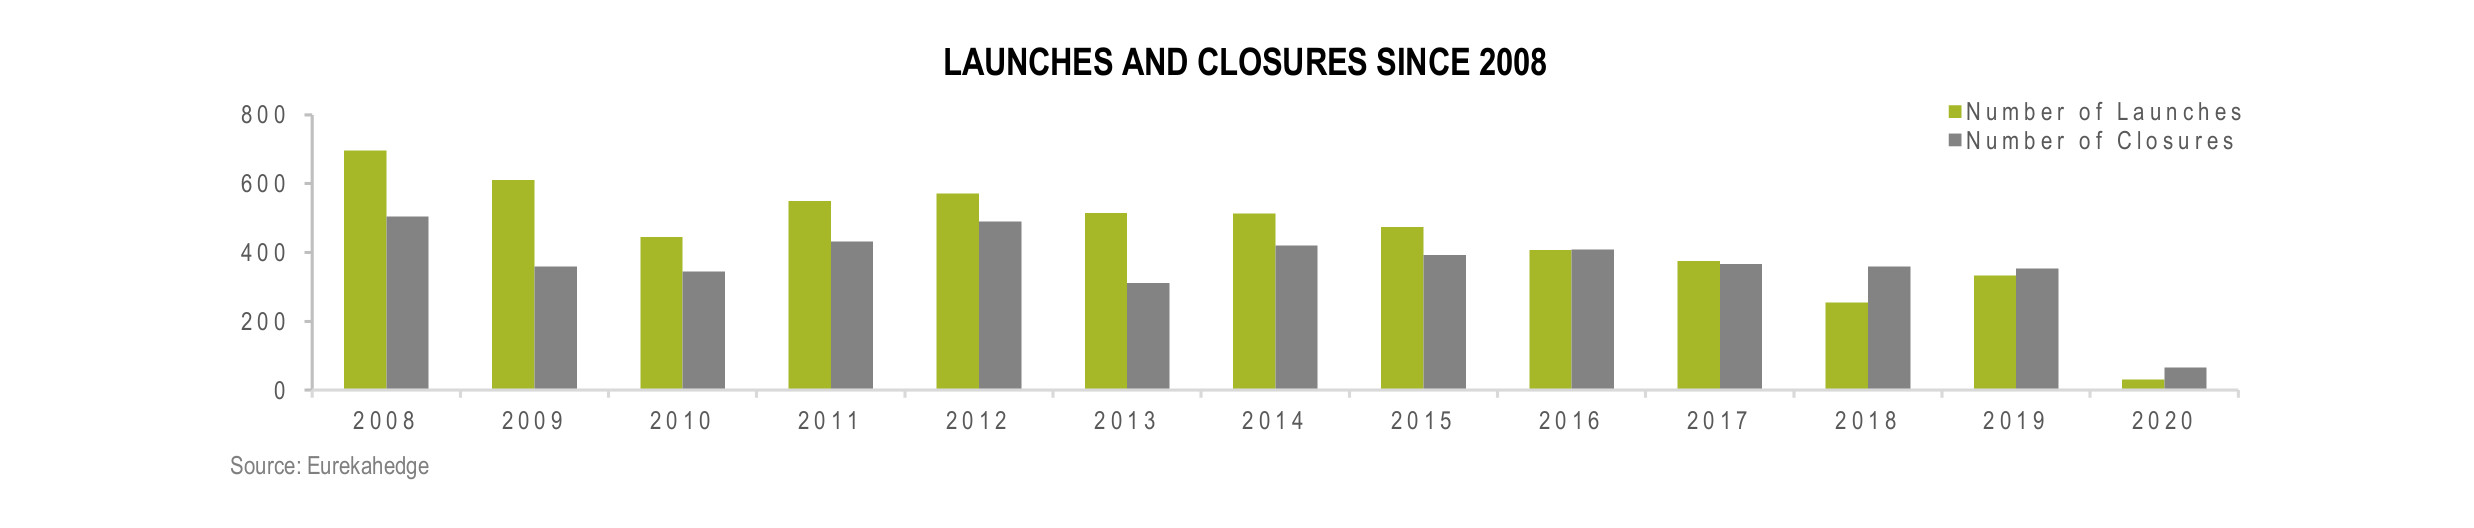 North American Hedge Funds Infographic May 2020 - Launches and Closures